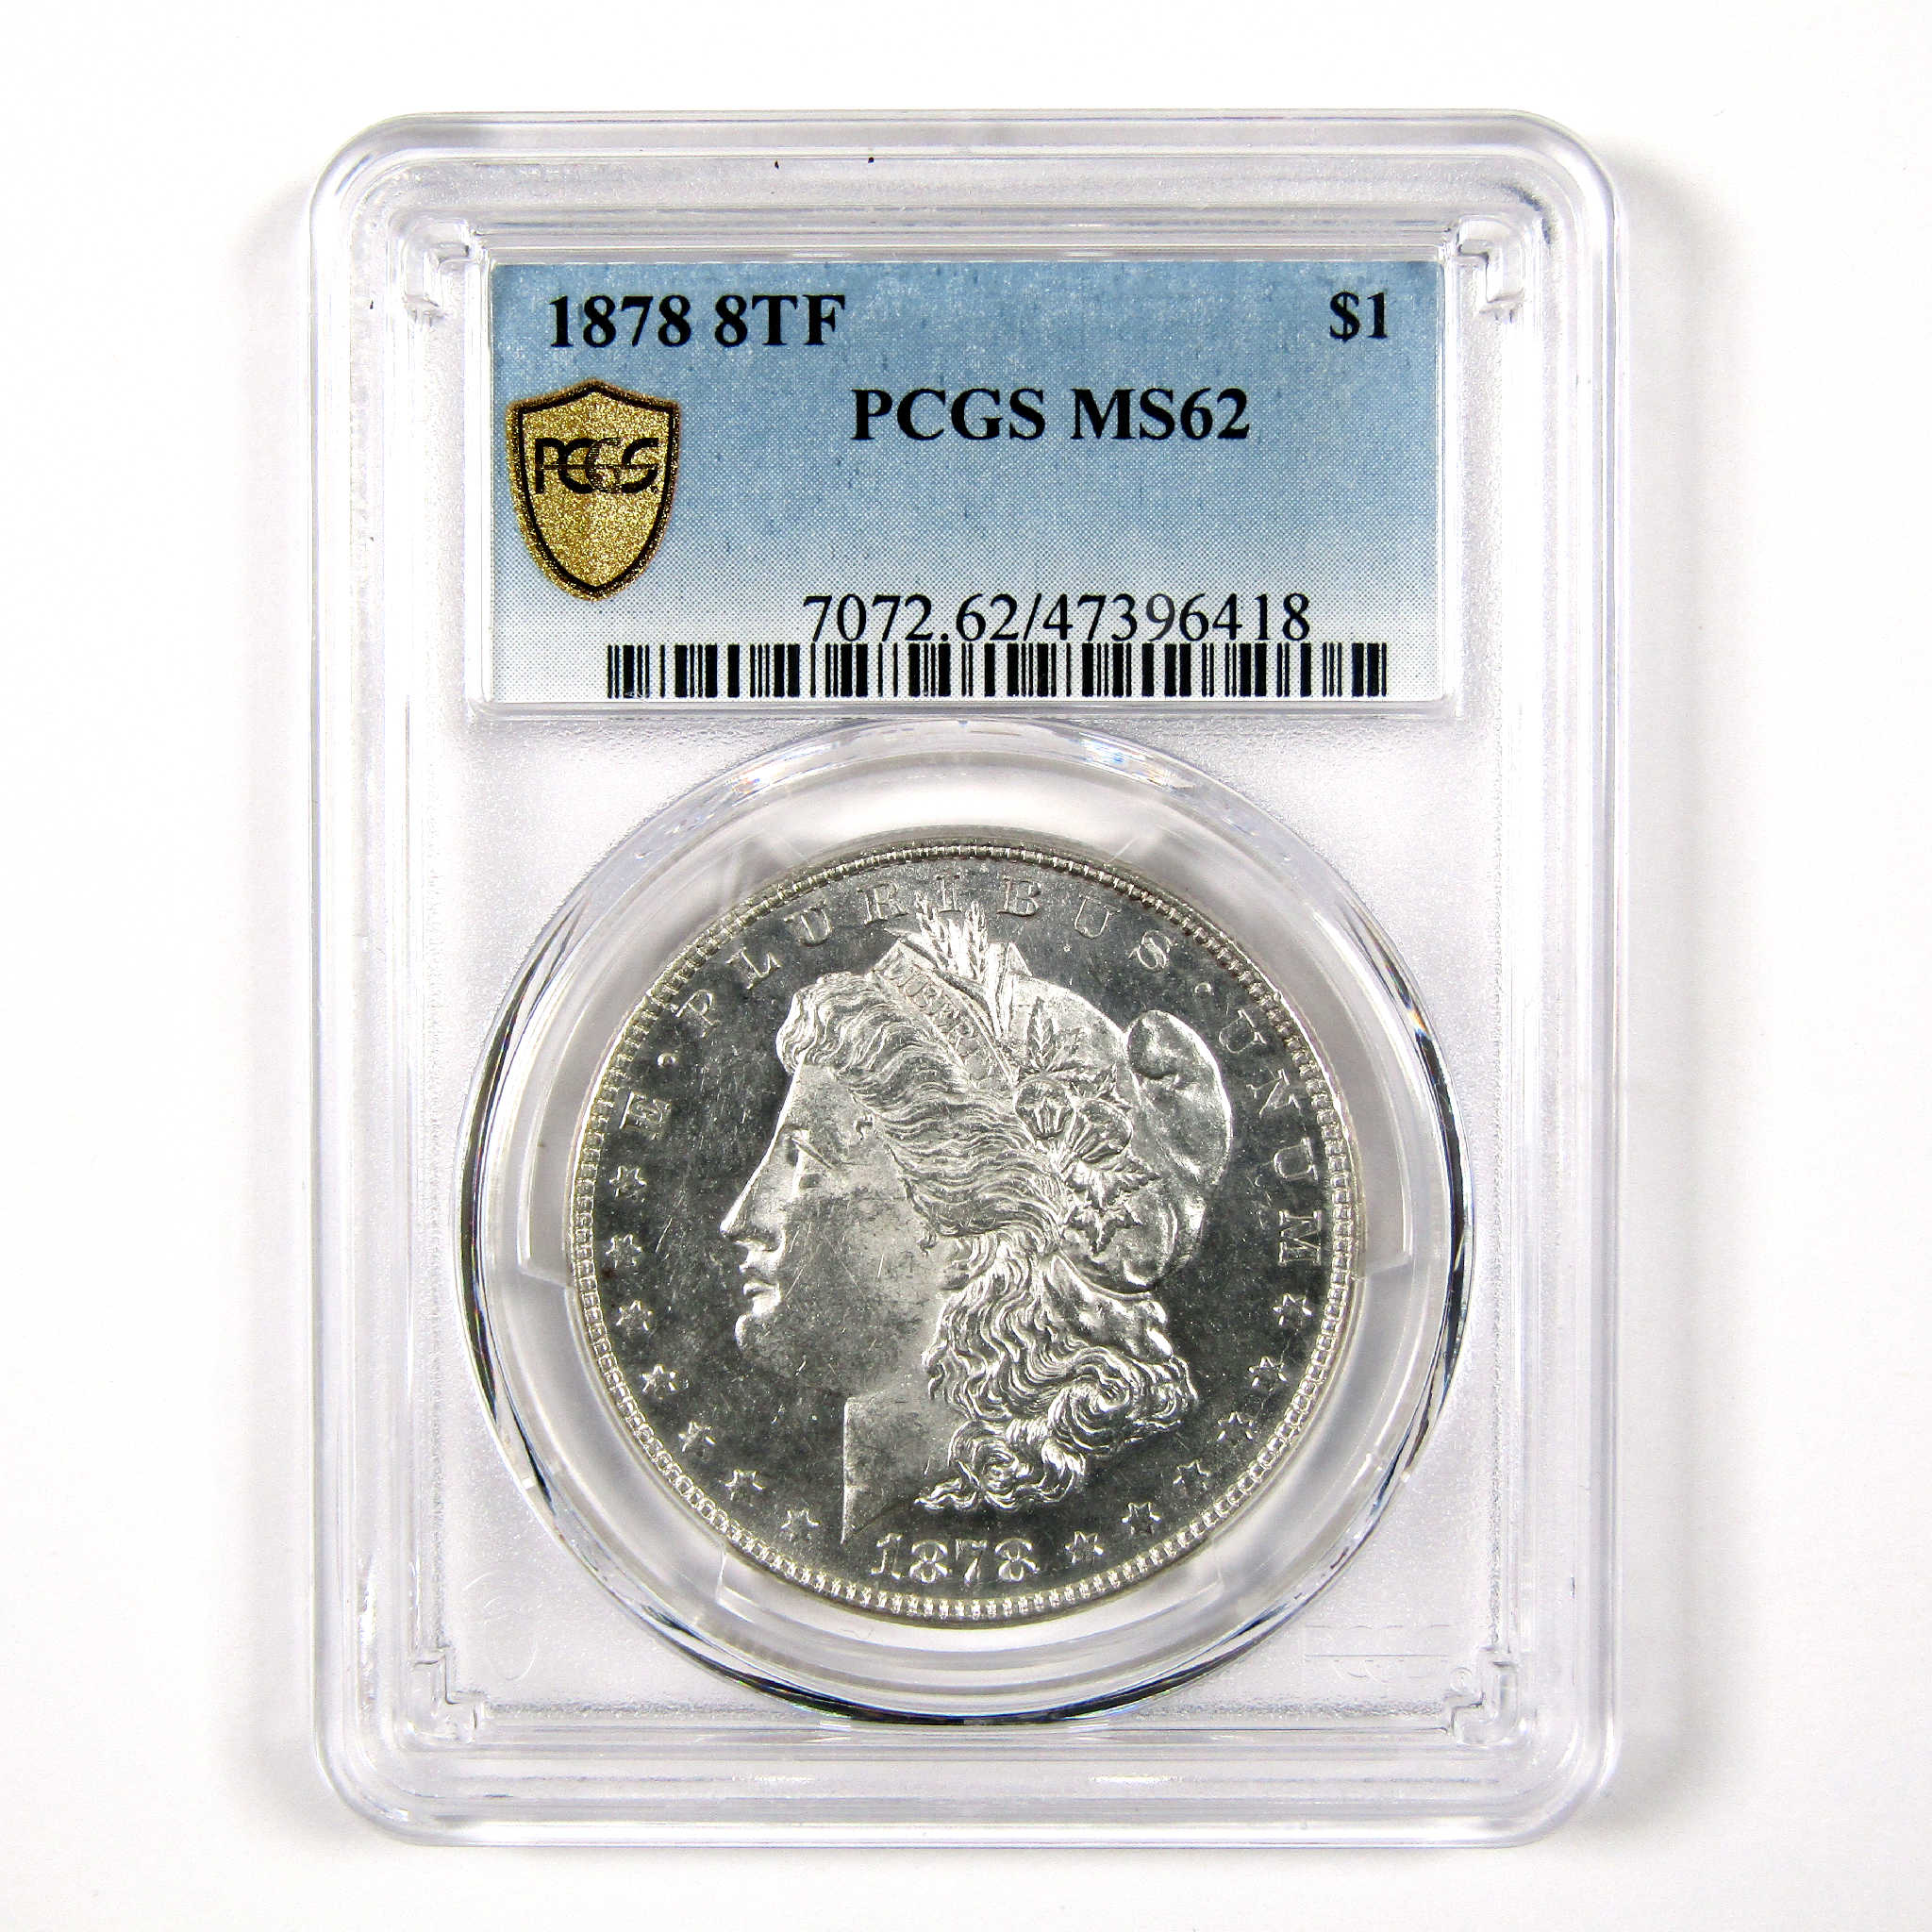 1878 8TF Morgan Dollar MS 62 PCGS Silver $1 Uncirculated SKU:I11340 - Morgan coin - Morgan silver dollar - Morgan silver dollar for sale - Profile Coins &amp; Collectibles